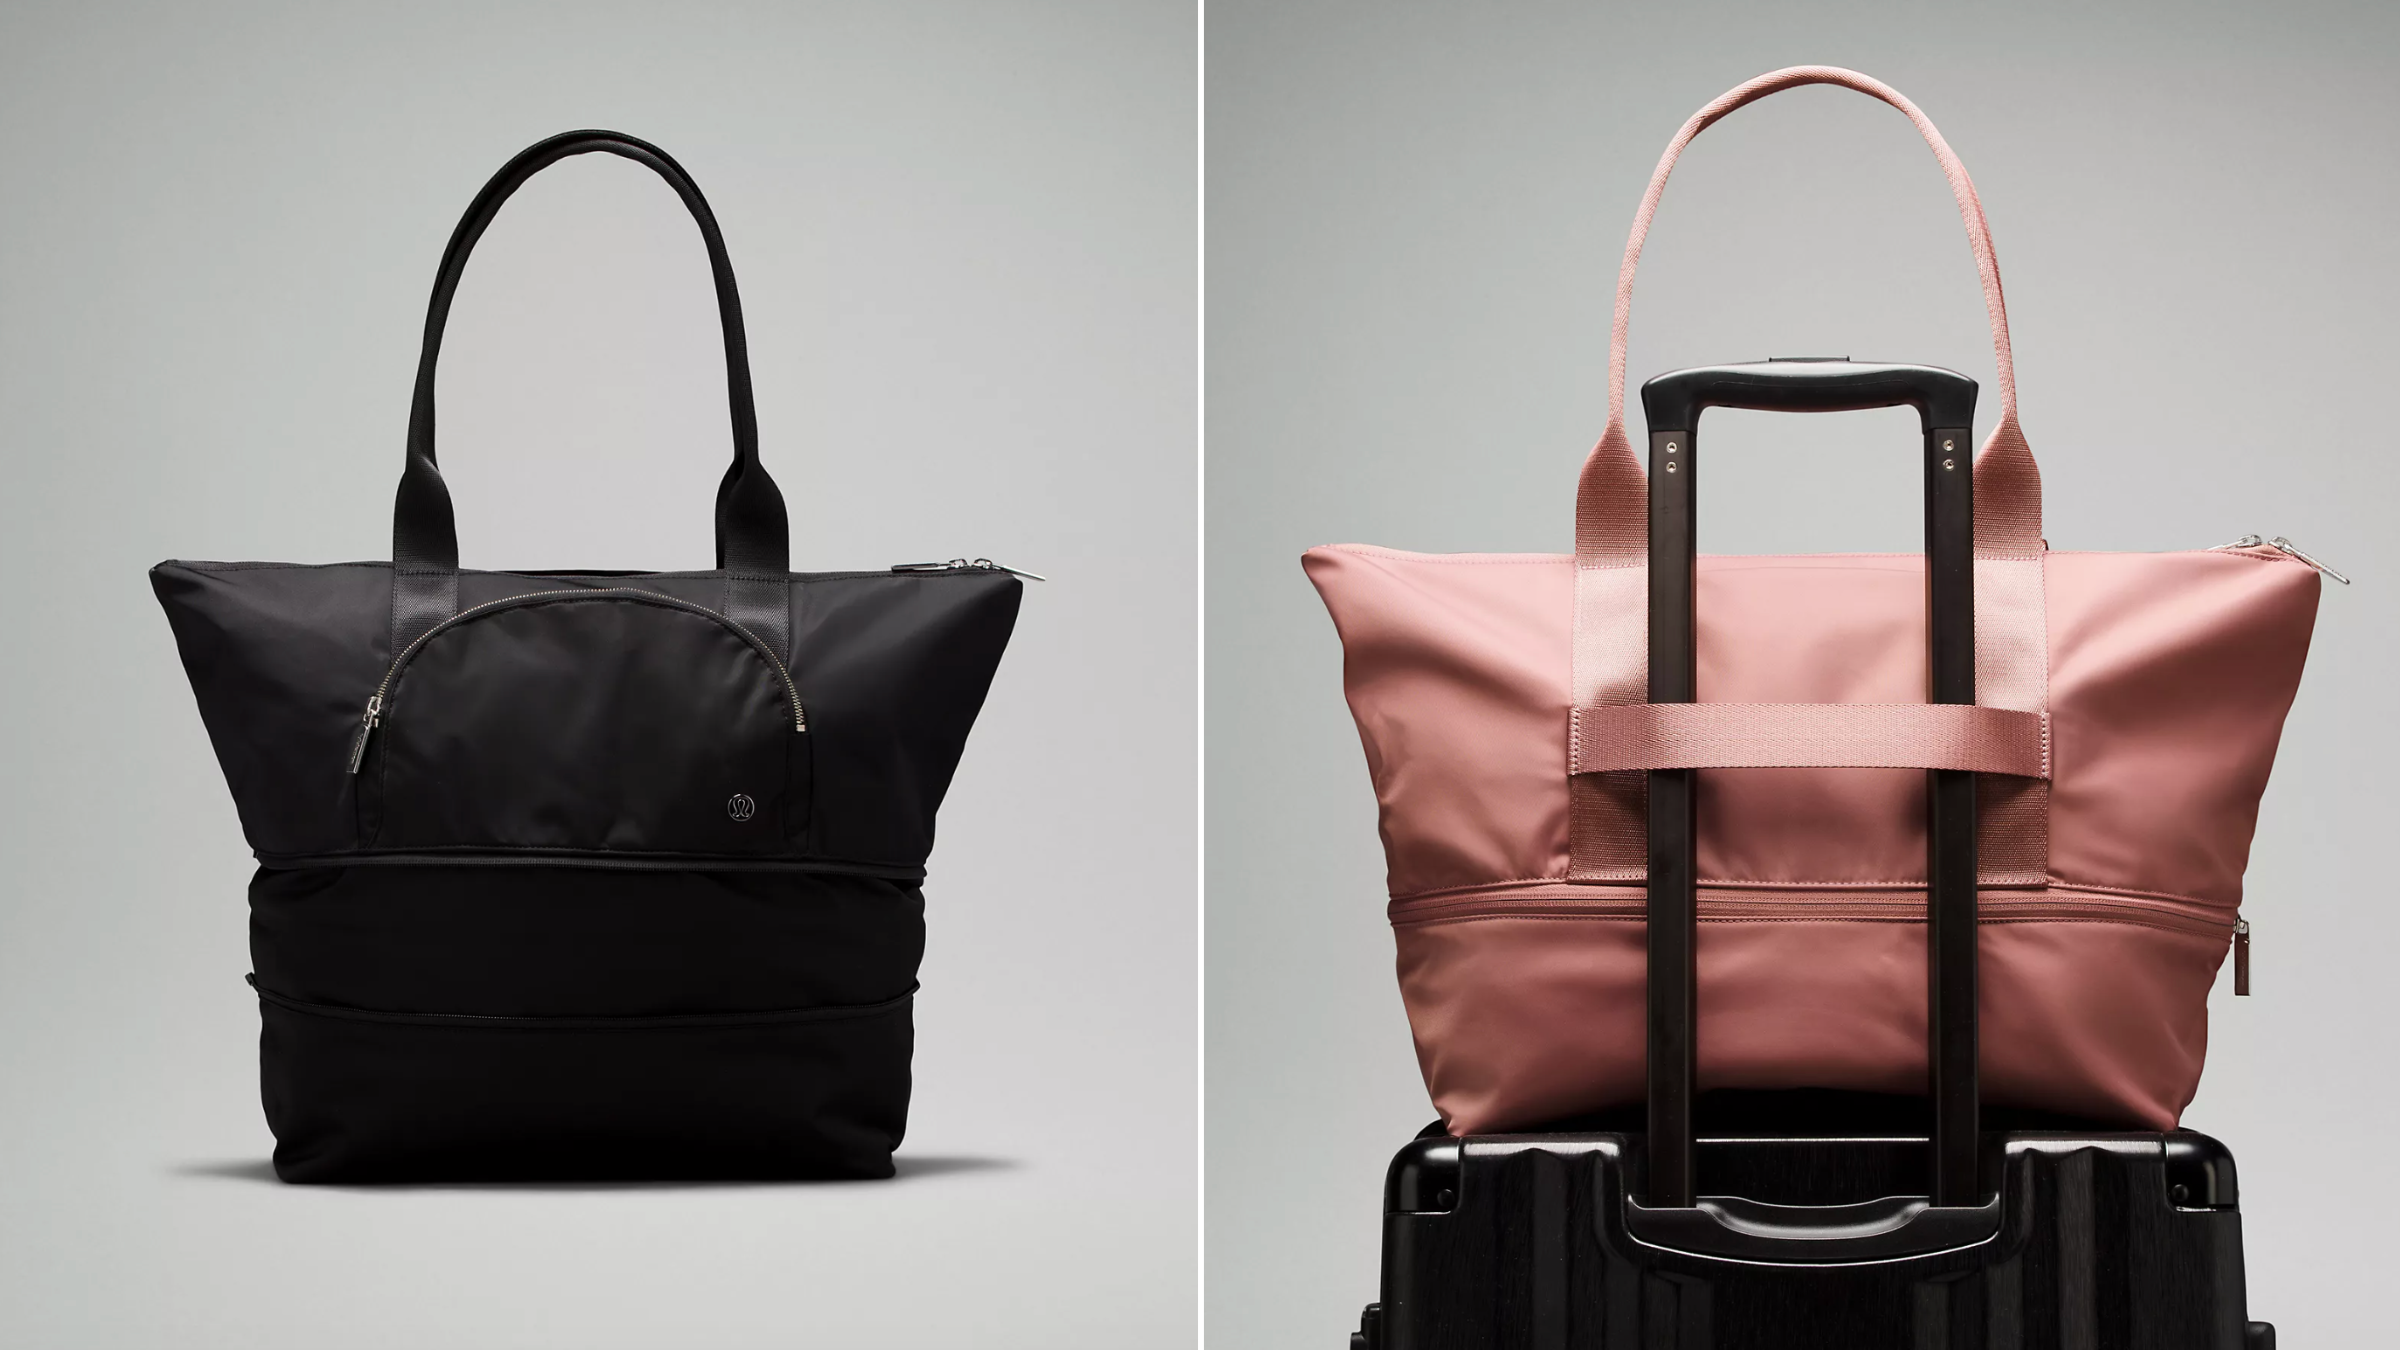 This expandable Lululemon tote is ‘the new Mary Poppins bag’ — and it has all the pockets you could want